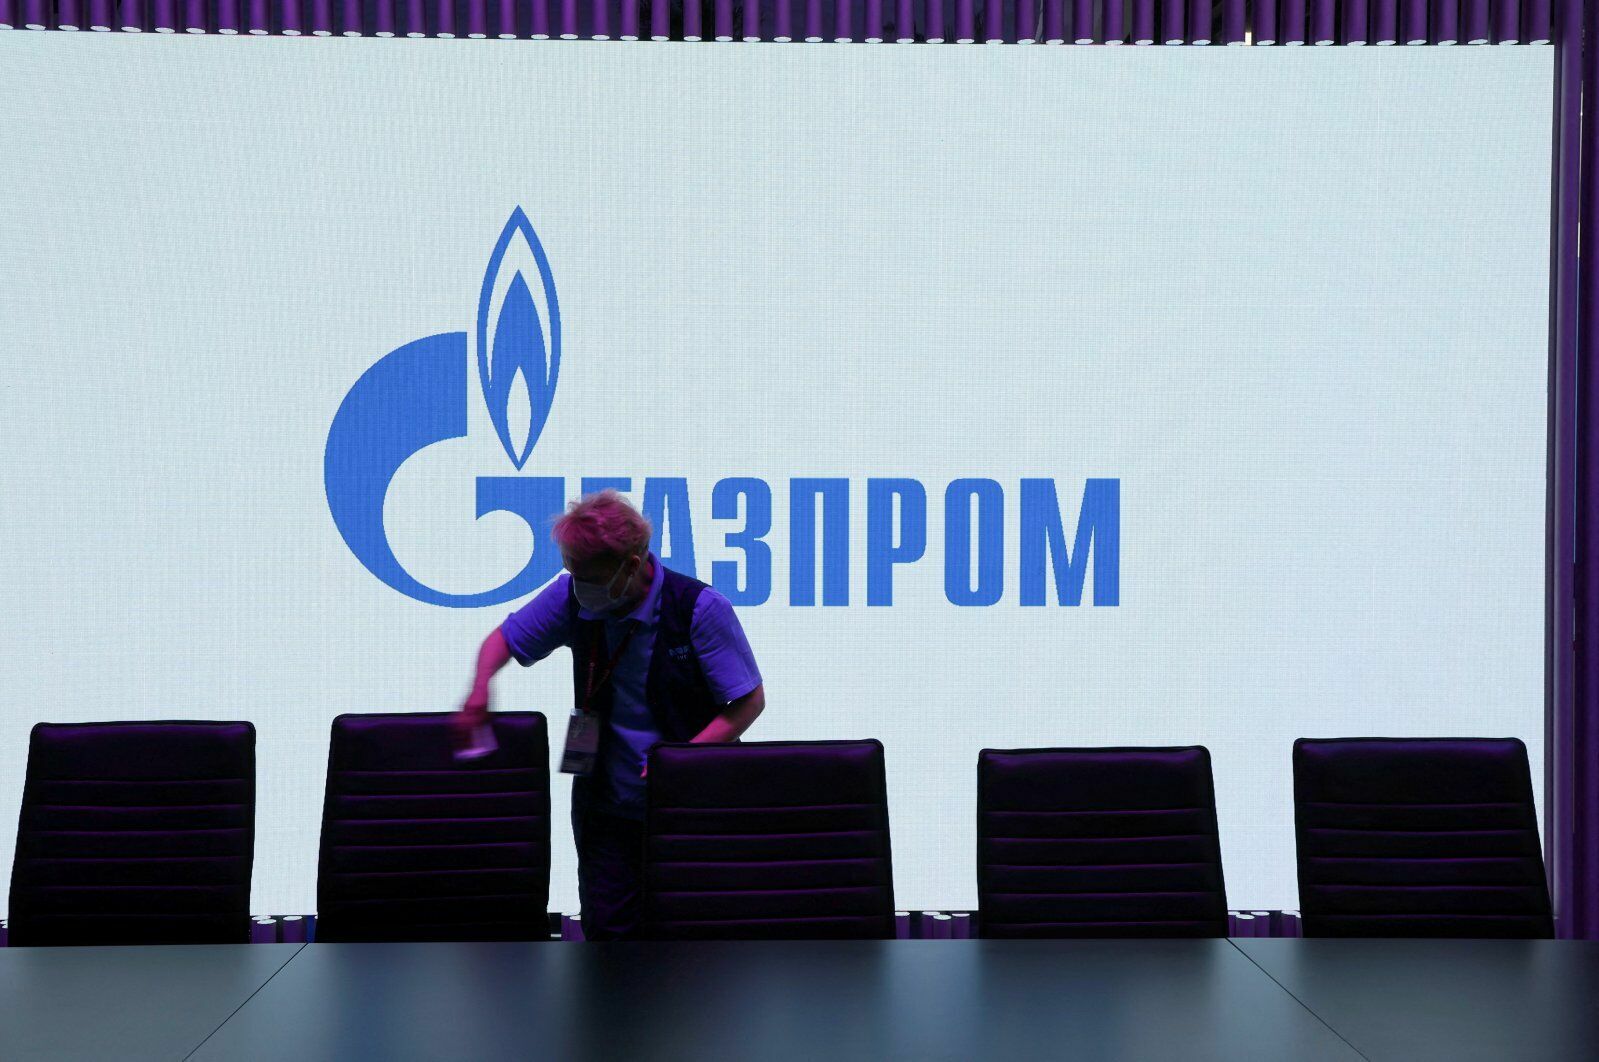 Alexey Belogoryev: "Gazprom is turning into a company with a moderate profit"